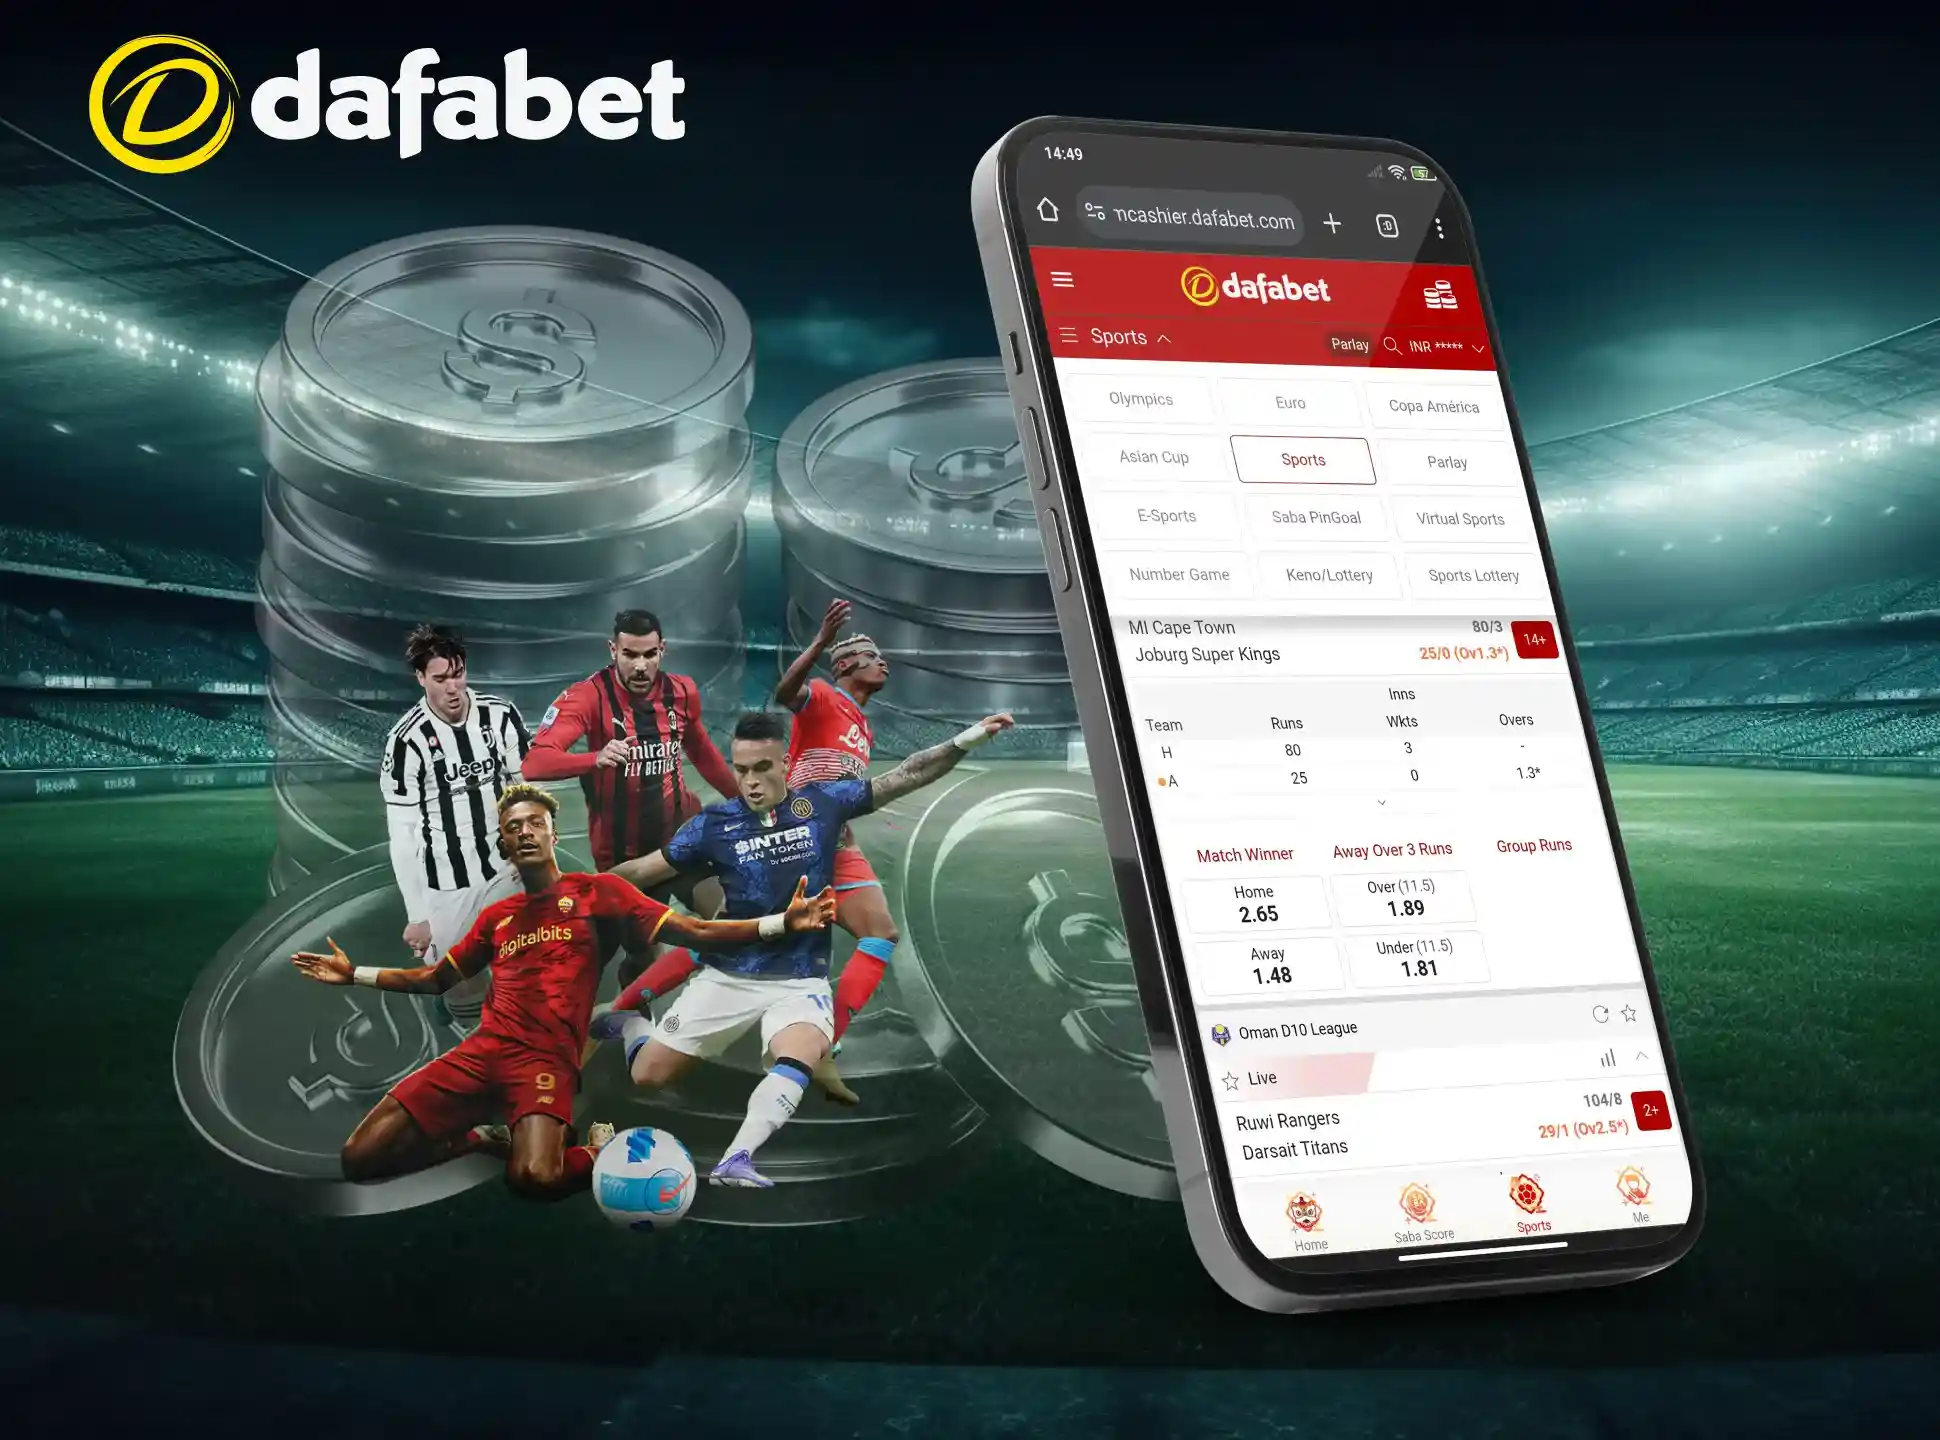 The Dafabet app offers its Indian players several sports betting options.